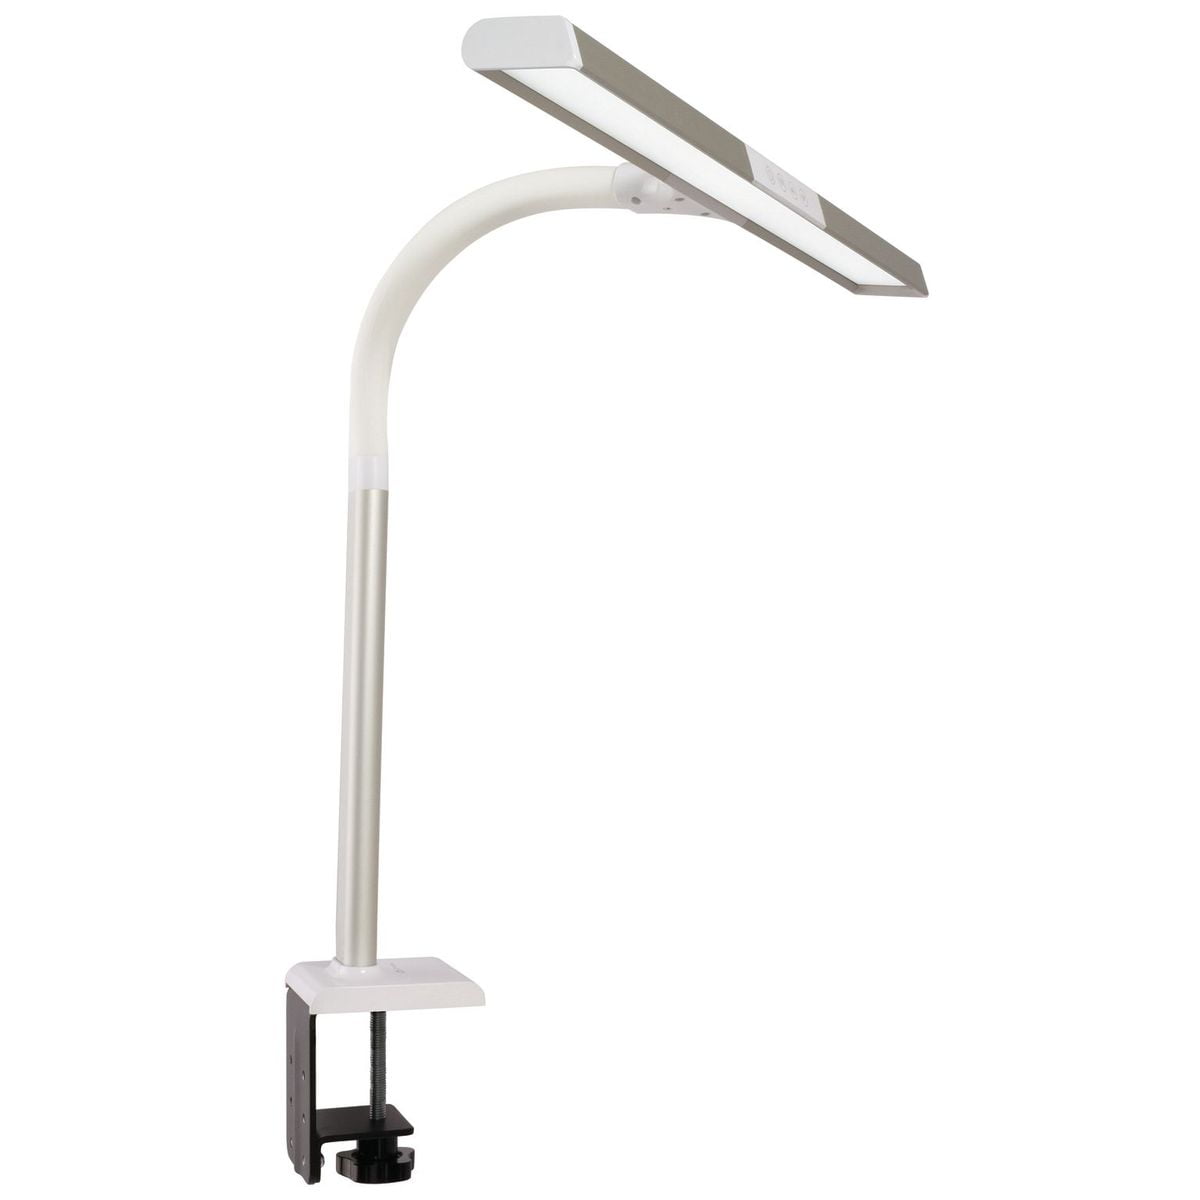 OttLite 3.5-Inch LED Magnifier Light with Clip and Stand